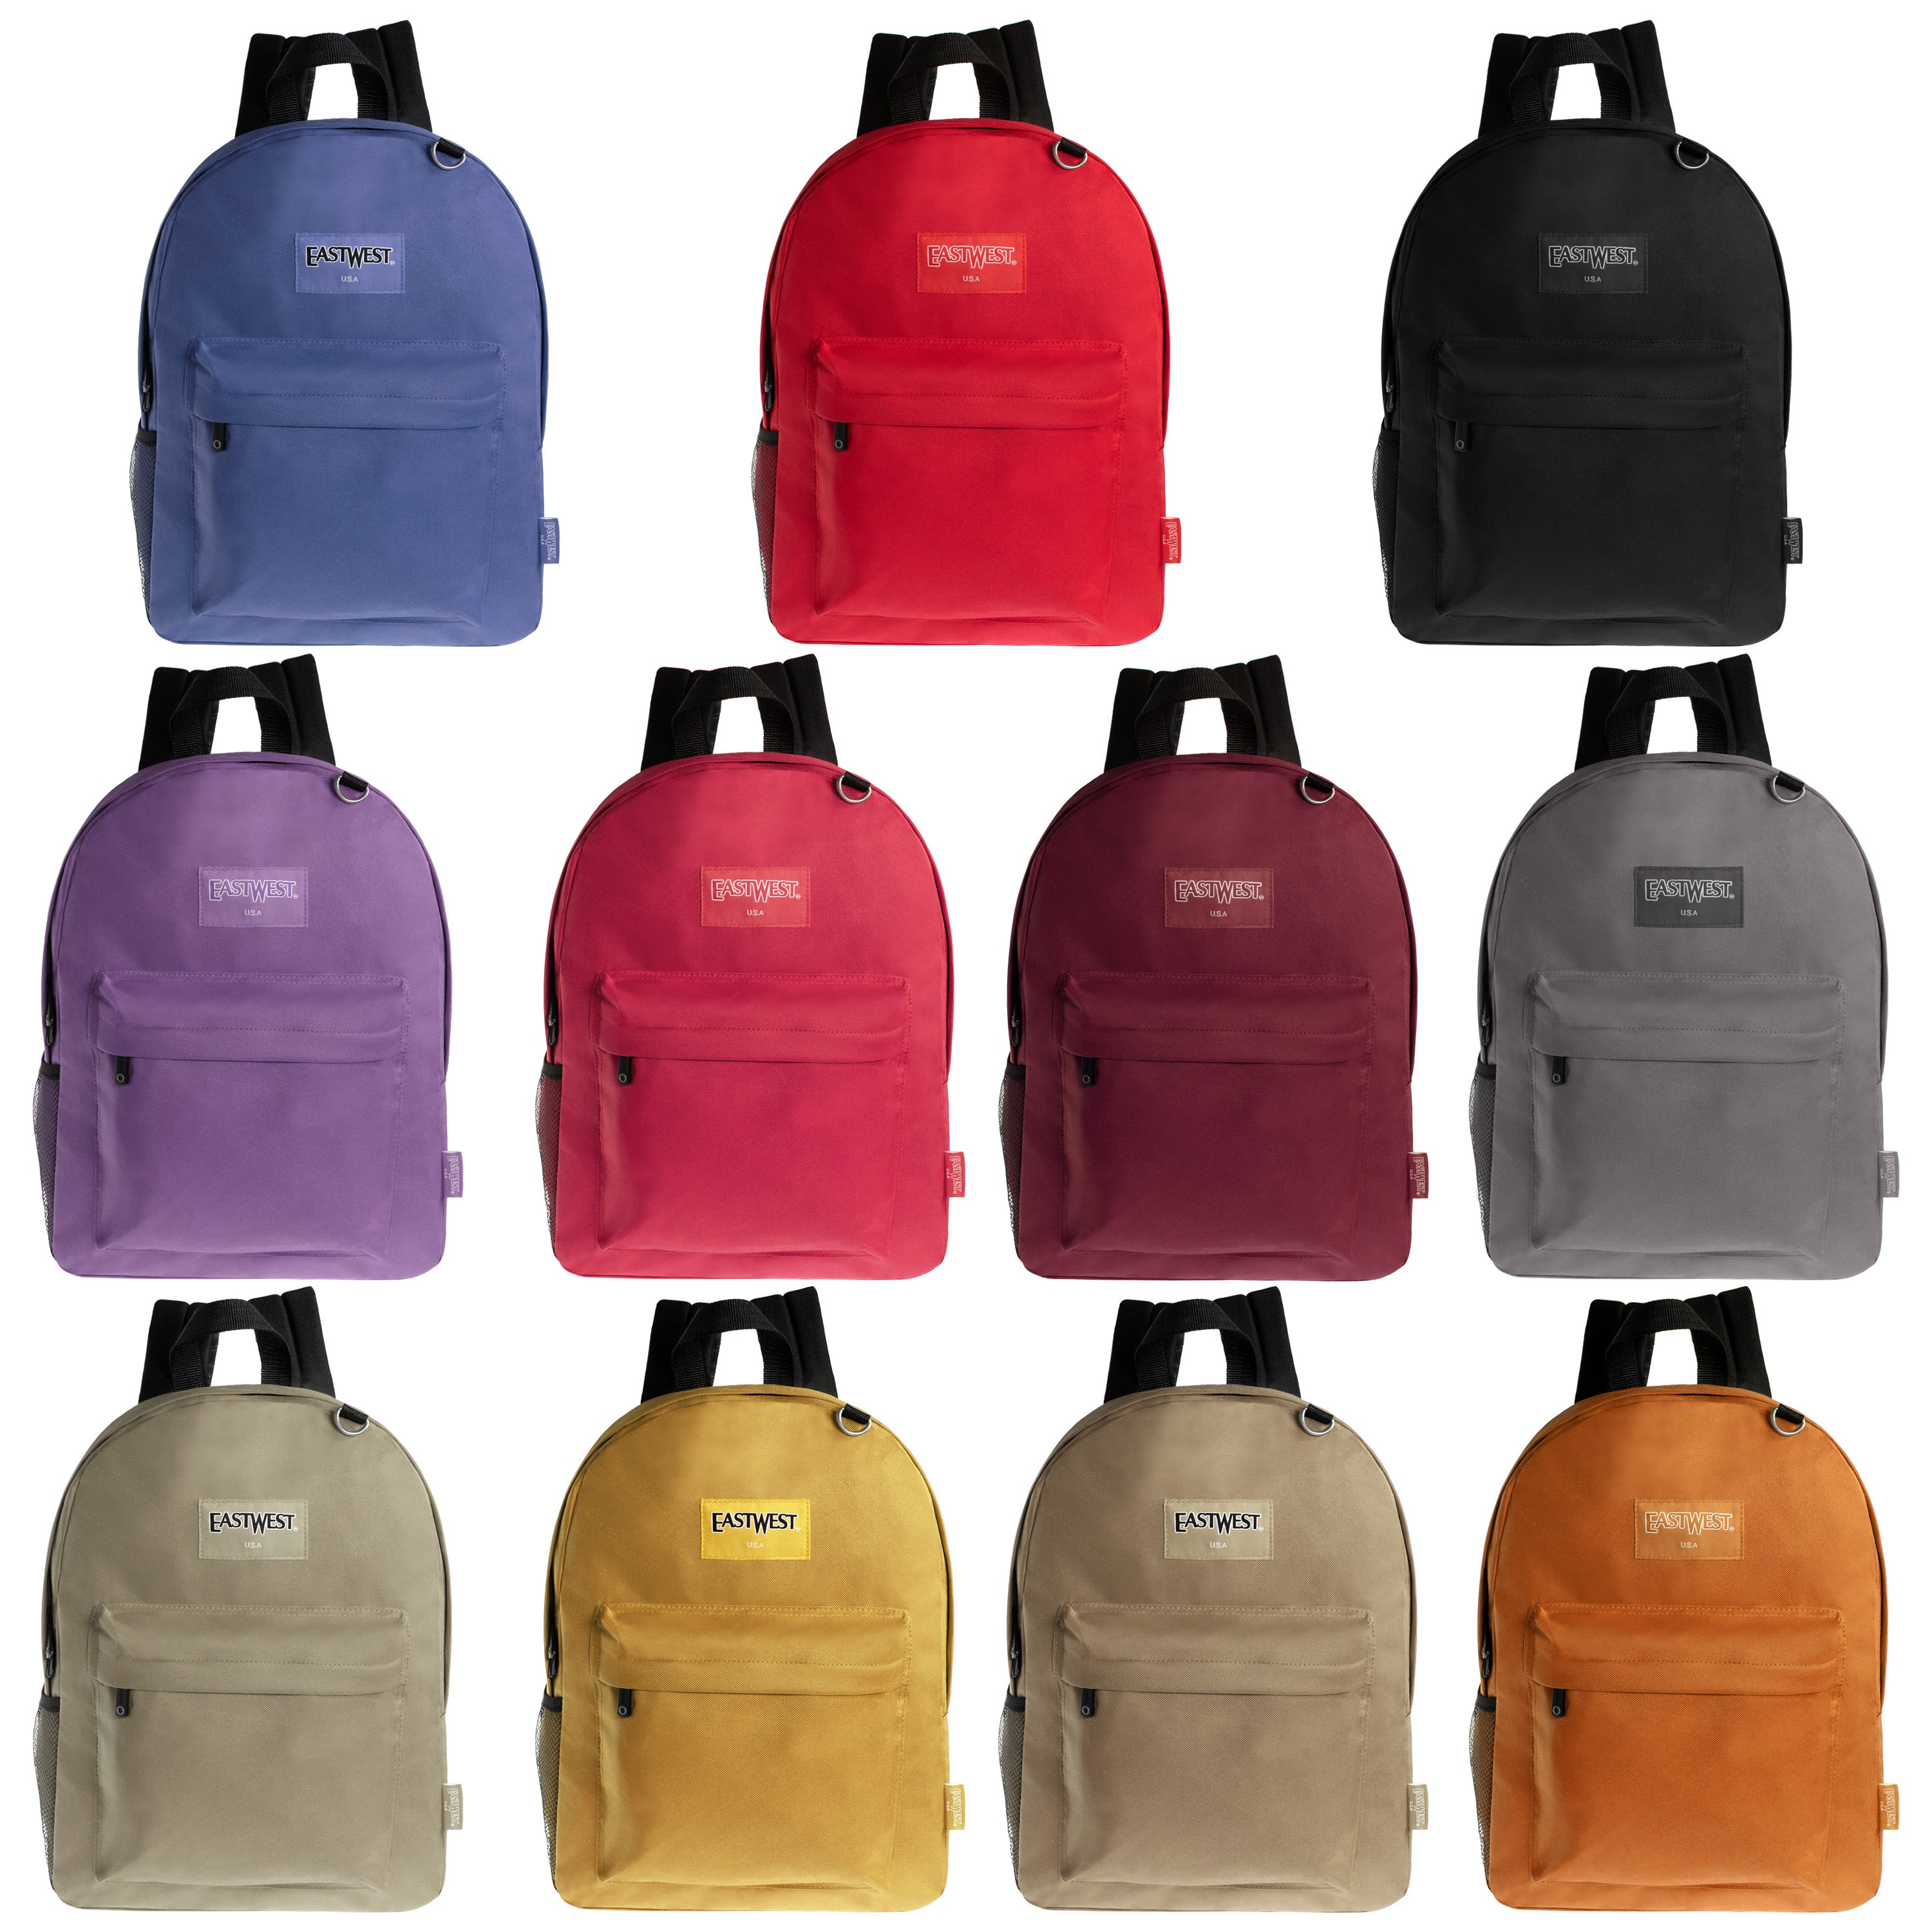 17 Combo Set Of School Wholesale Backpacks with Free Pencil Pouches